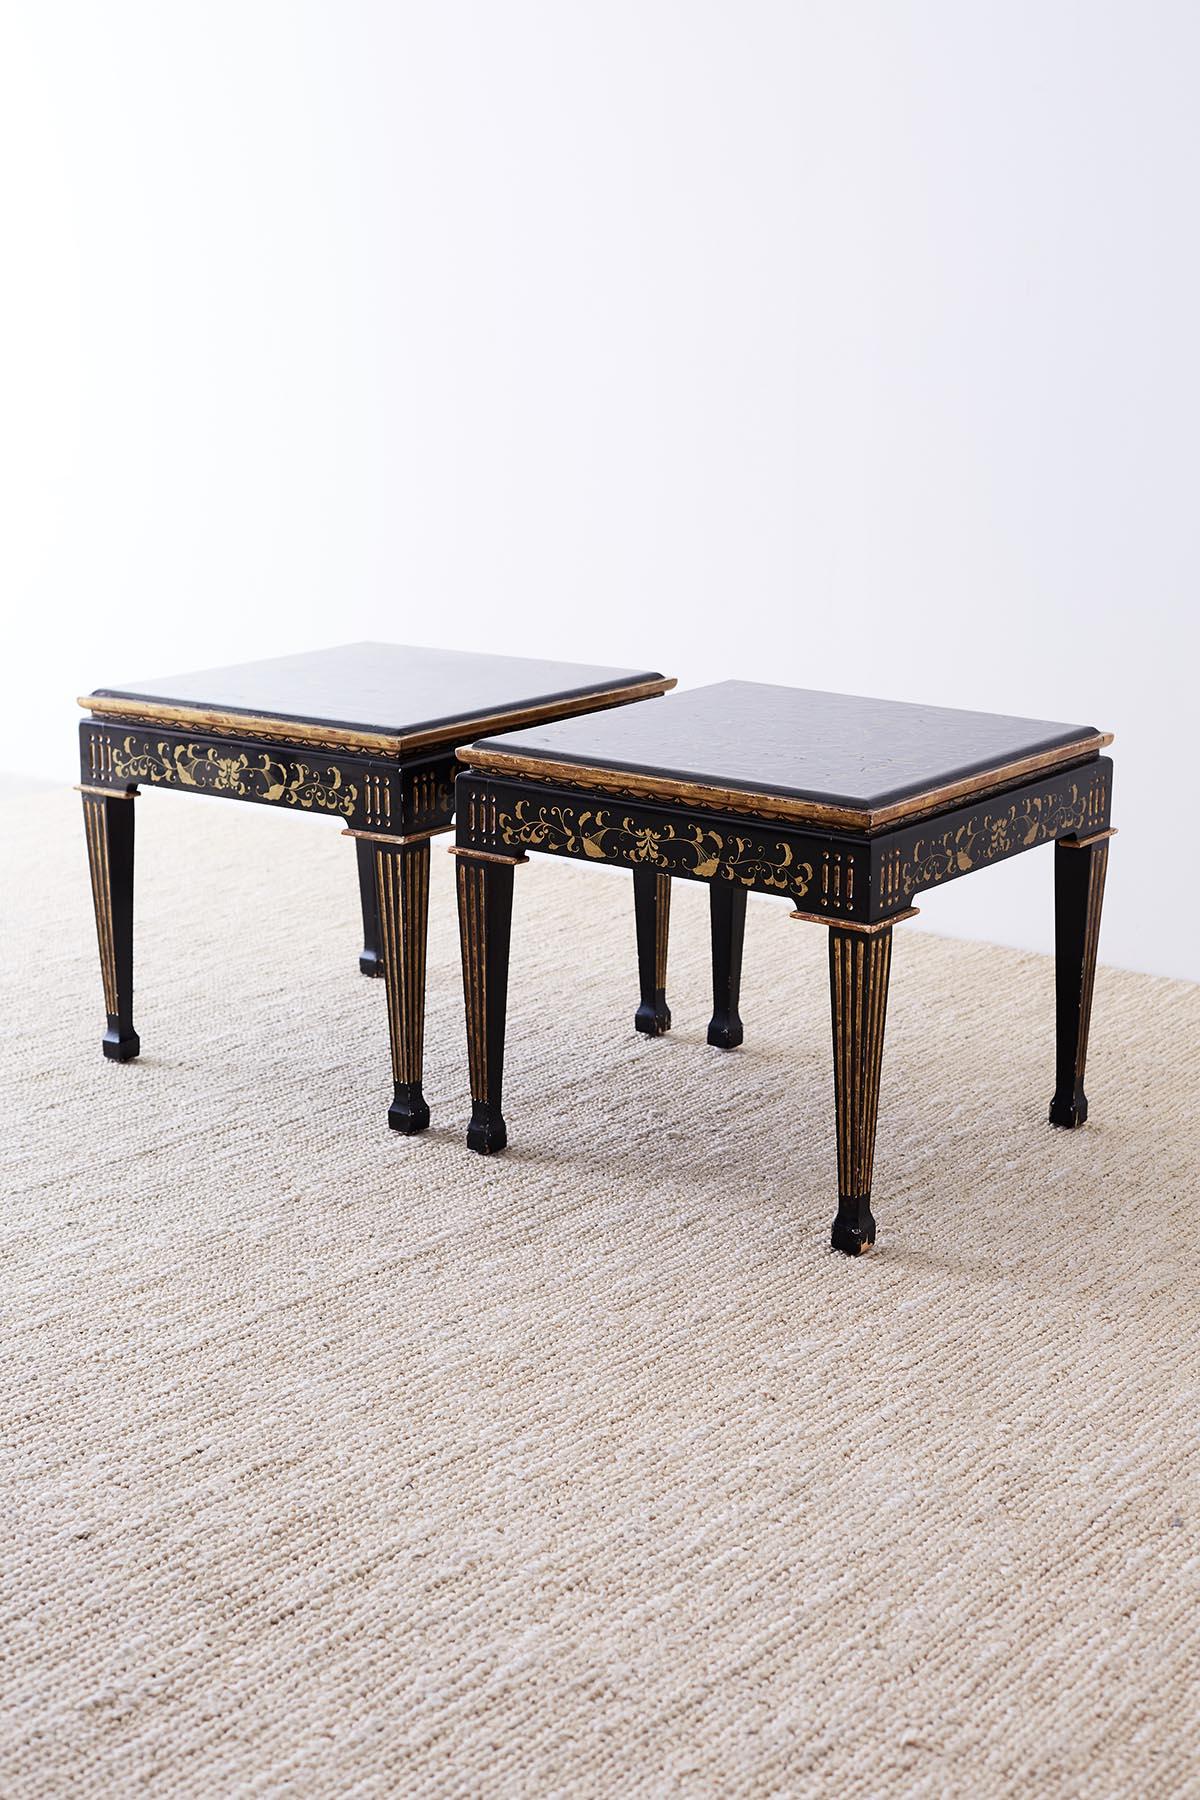 Pair of Italian Neoclassical Parcel-Gilt Lacquered Drink Tables 1